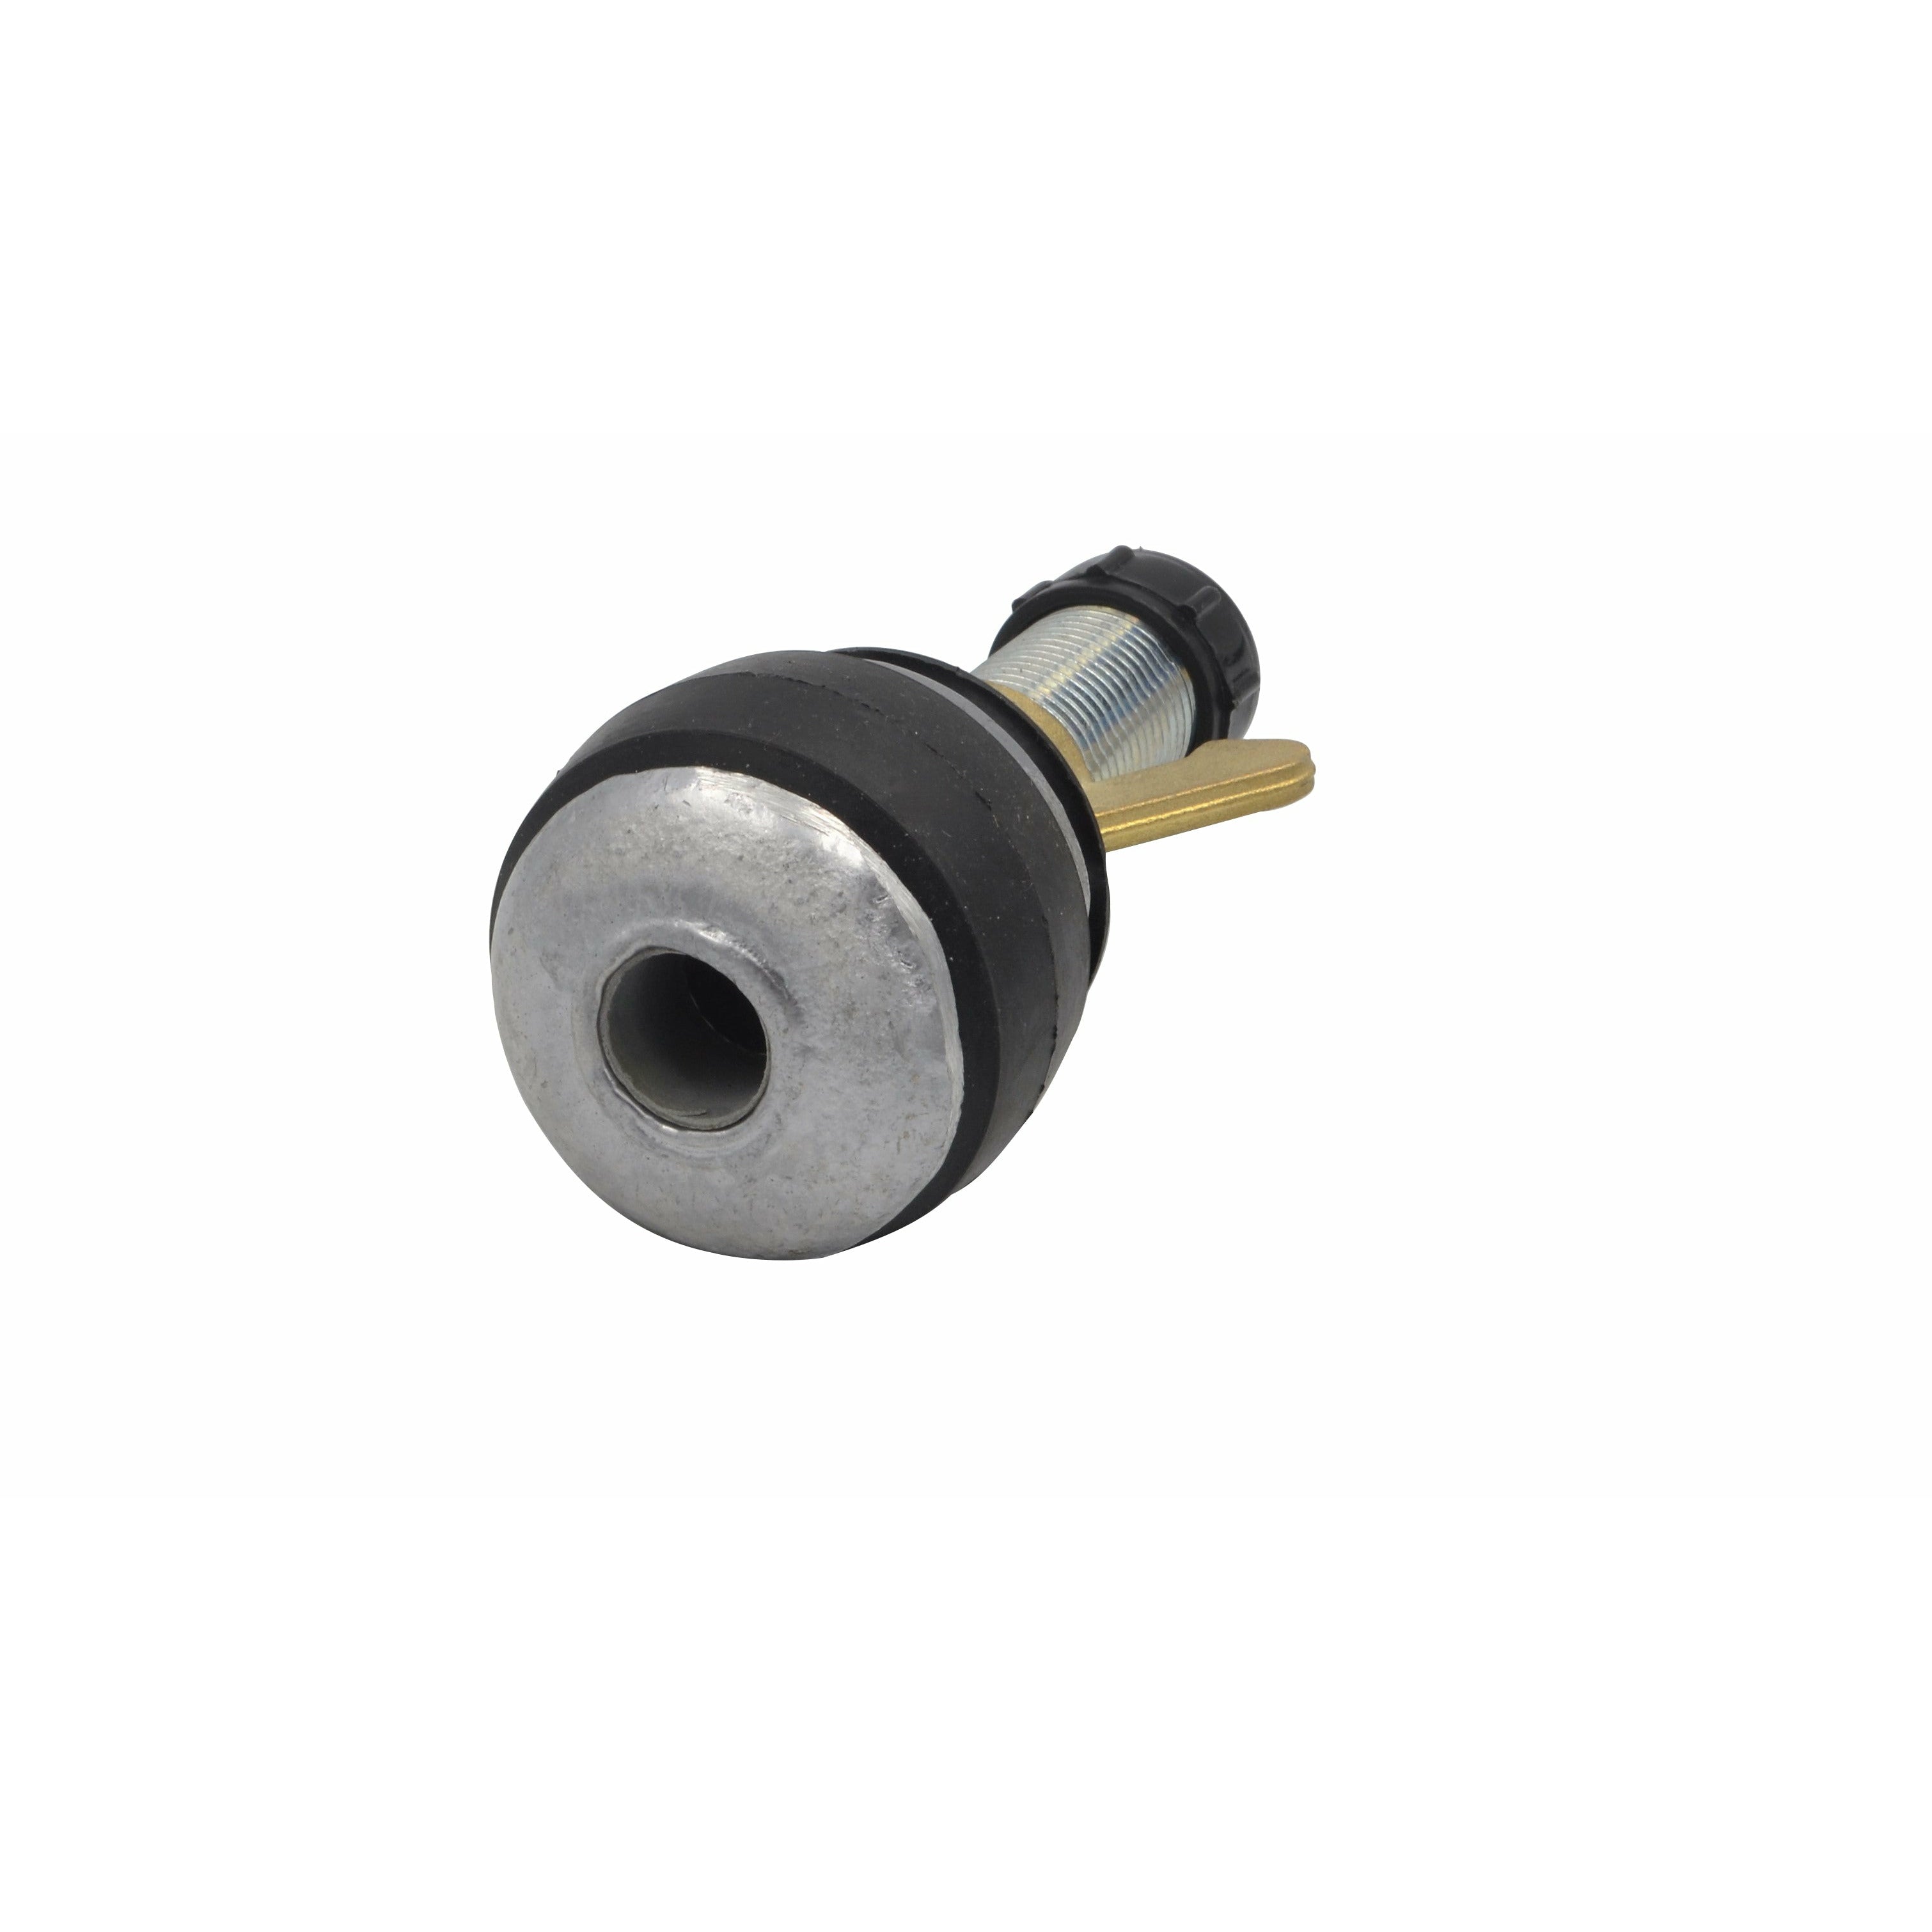 Aluminium Alloy pipe expanding plug with 13 mm bypass 49mm-62mm 203 MPA 050-13